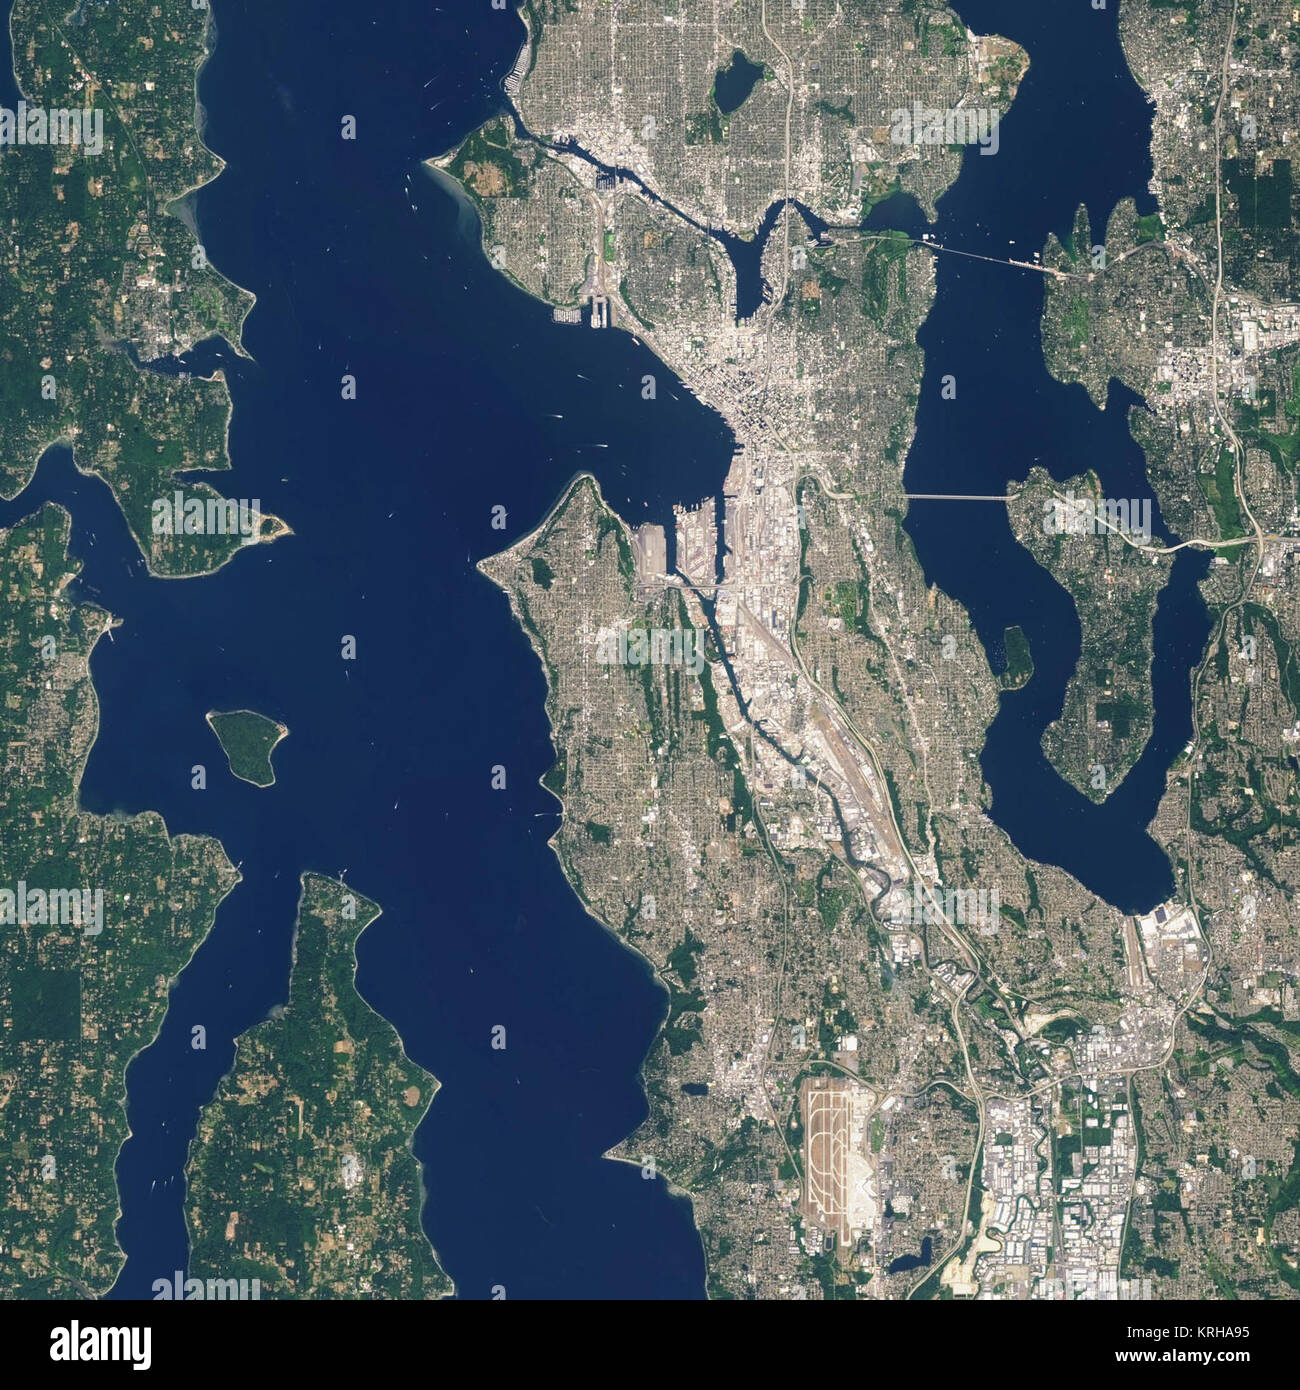 Landsat 7 image of Seattle, Washington acquired August 23, 2014.  Landsat 7 is a U.S. satellite used to acquire remotely sensed images of the Earth's land surface and surrounding coastal regions. It is maintained by the Landsat 7 Project Science Office at the NASA Goddard Space Flight Center in Greenbelt, MD.  Landsat satellites have been acquiring images of the Earth’s land surface since 1972.  Currently there are more than 2 million Landsat images in the National Satellite Land Remote Sensing Data Archive.  For more information visit: <a href='http://landsat.usgs.gov/' rel='nofollow'>landsat Stock Photo